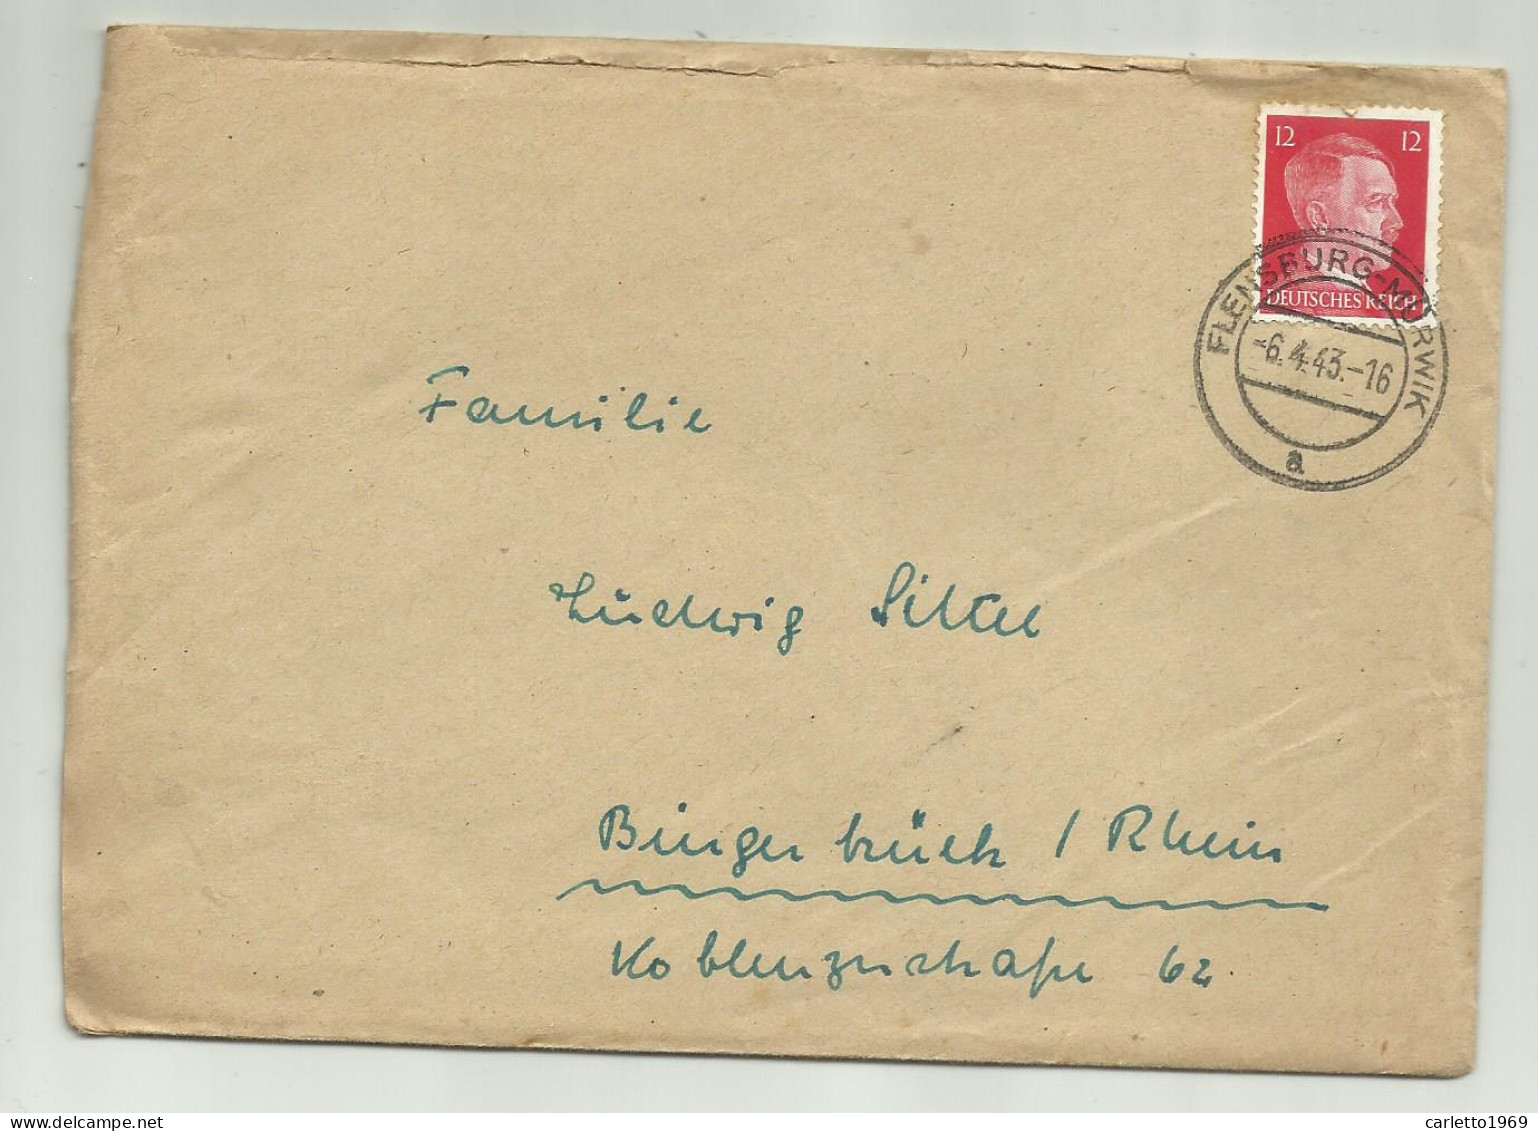   FELDPOST 1943 CON LETTERA  - Used Stamps